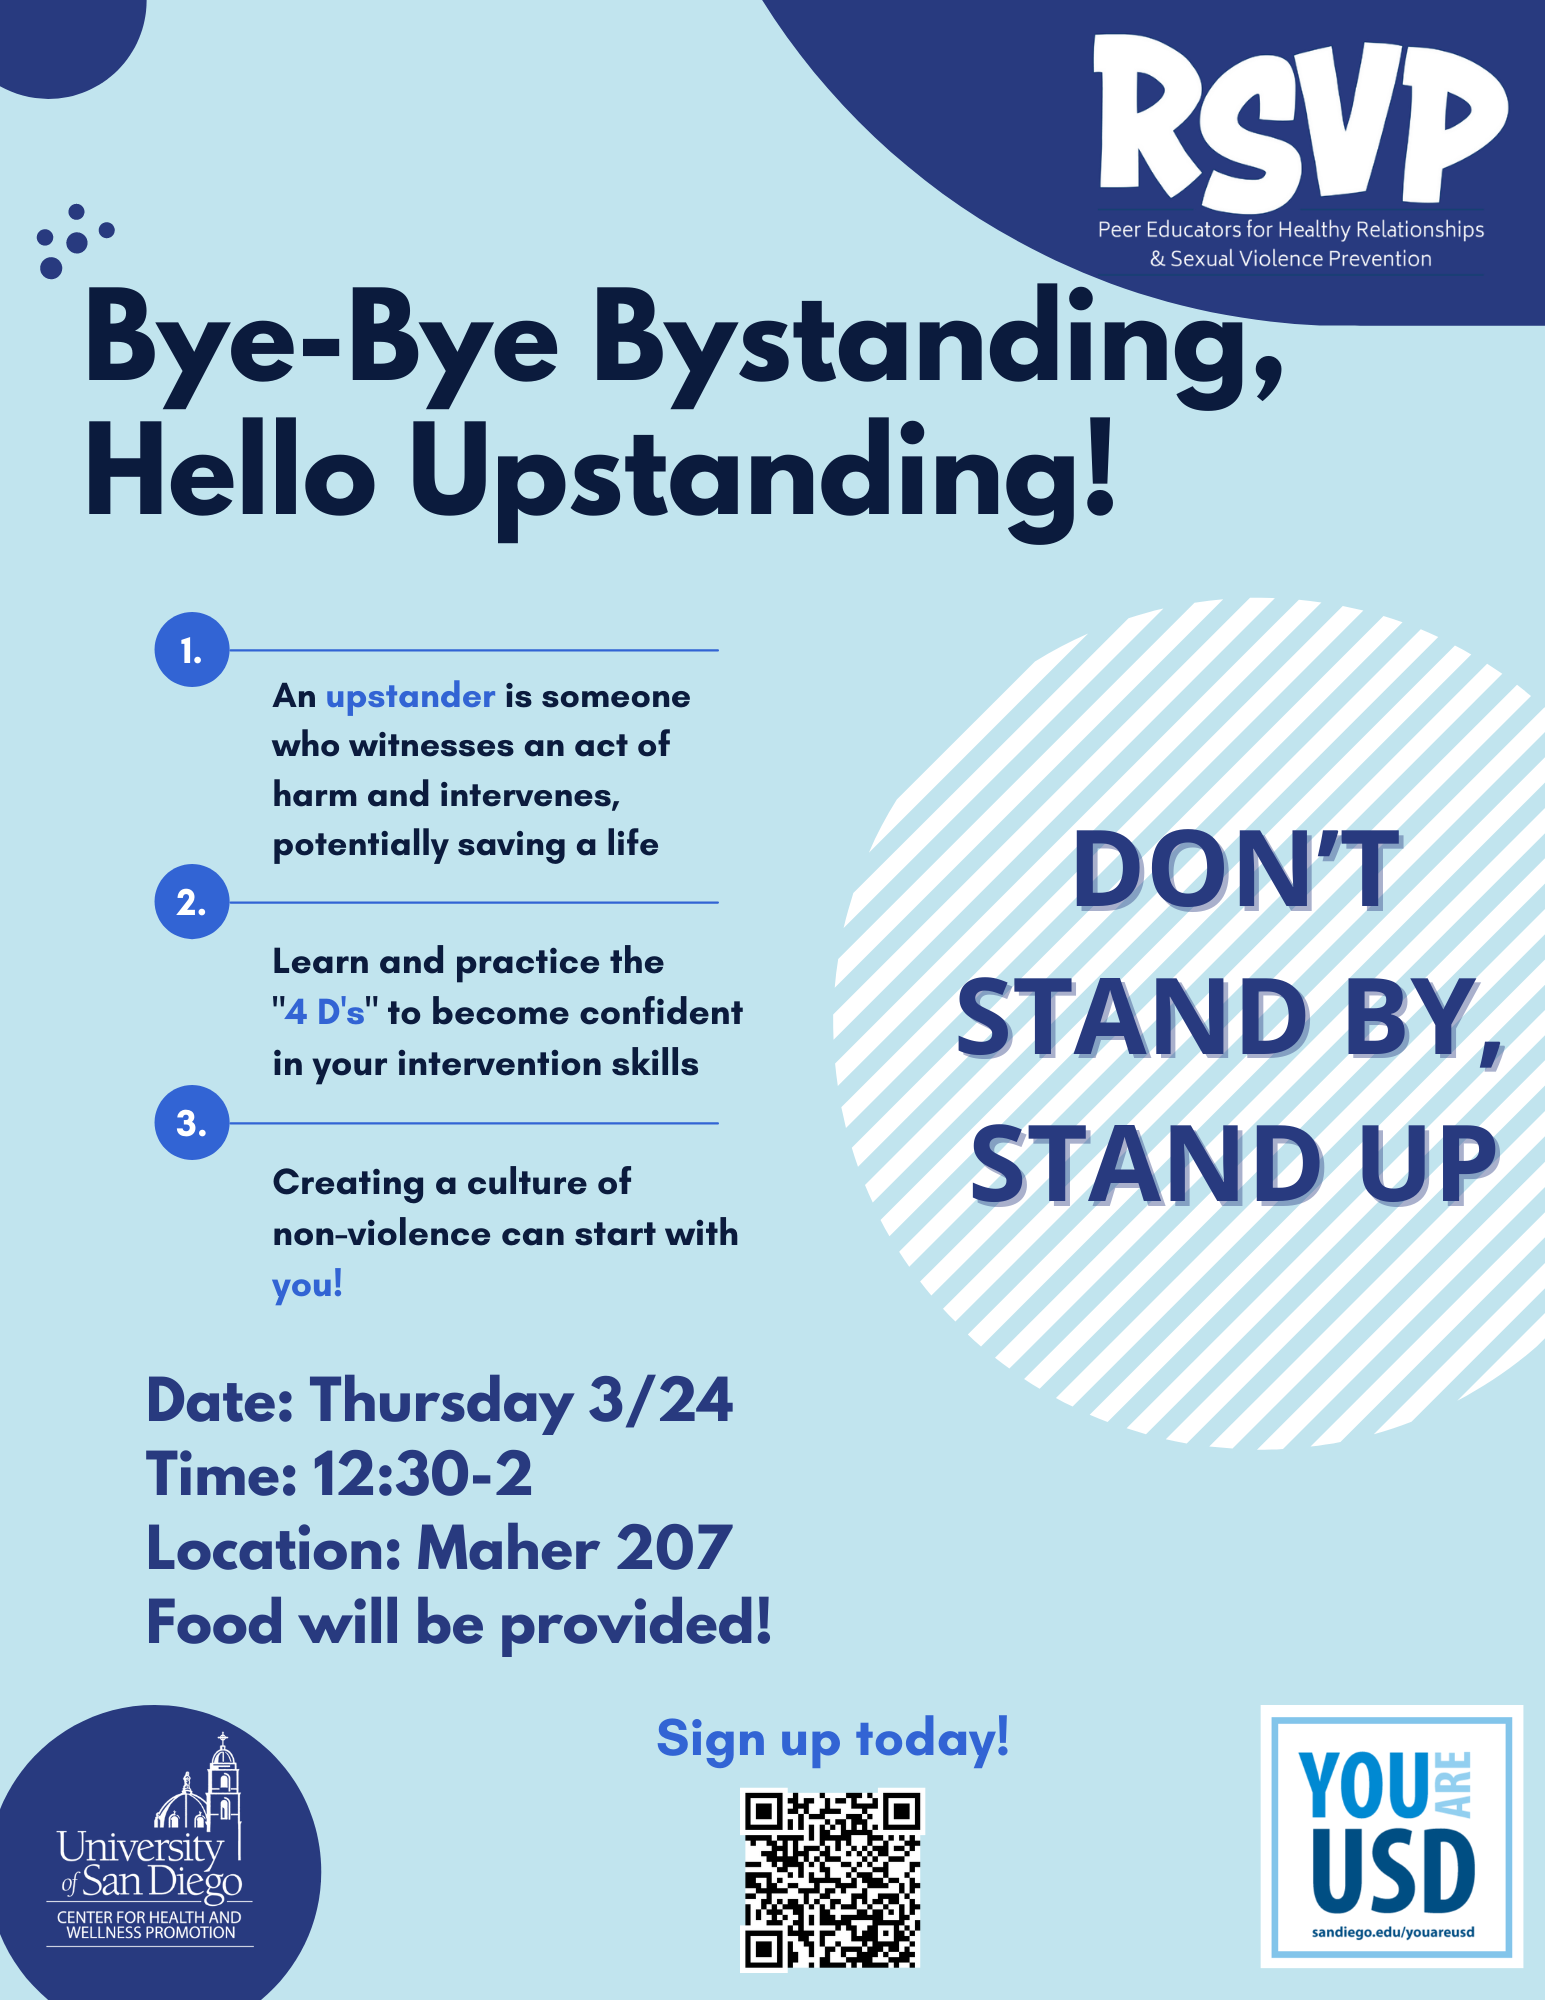 light and dark blue flier with the following information: Bye-bye Bystanding! Hello Upstanding!  Date: Thursday 3/24; Time: 12:30-2; Location: Maher 207 Food will be provided!